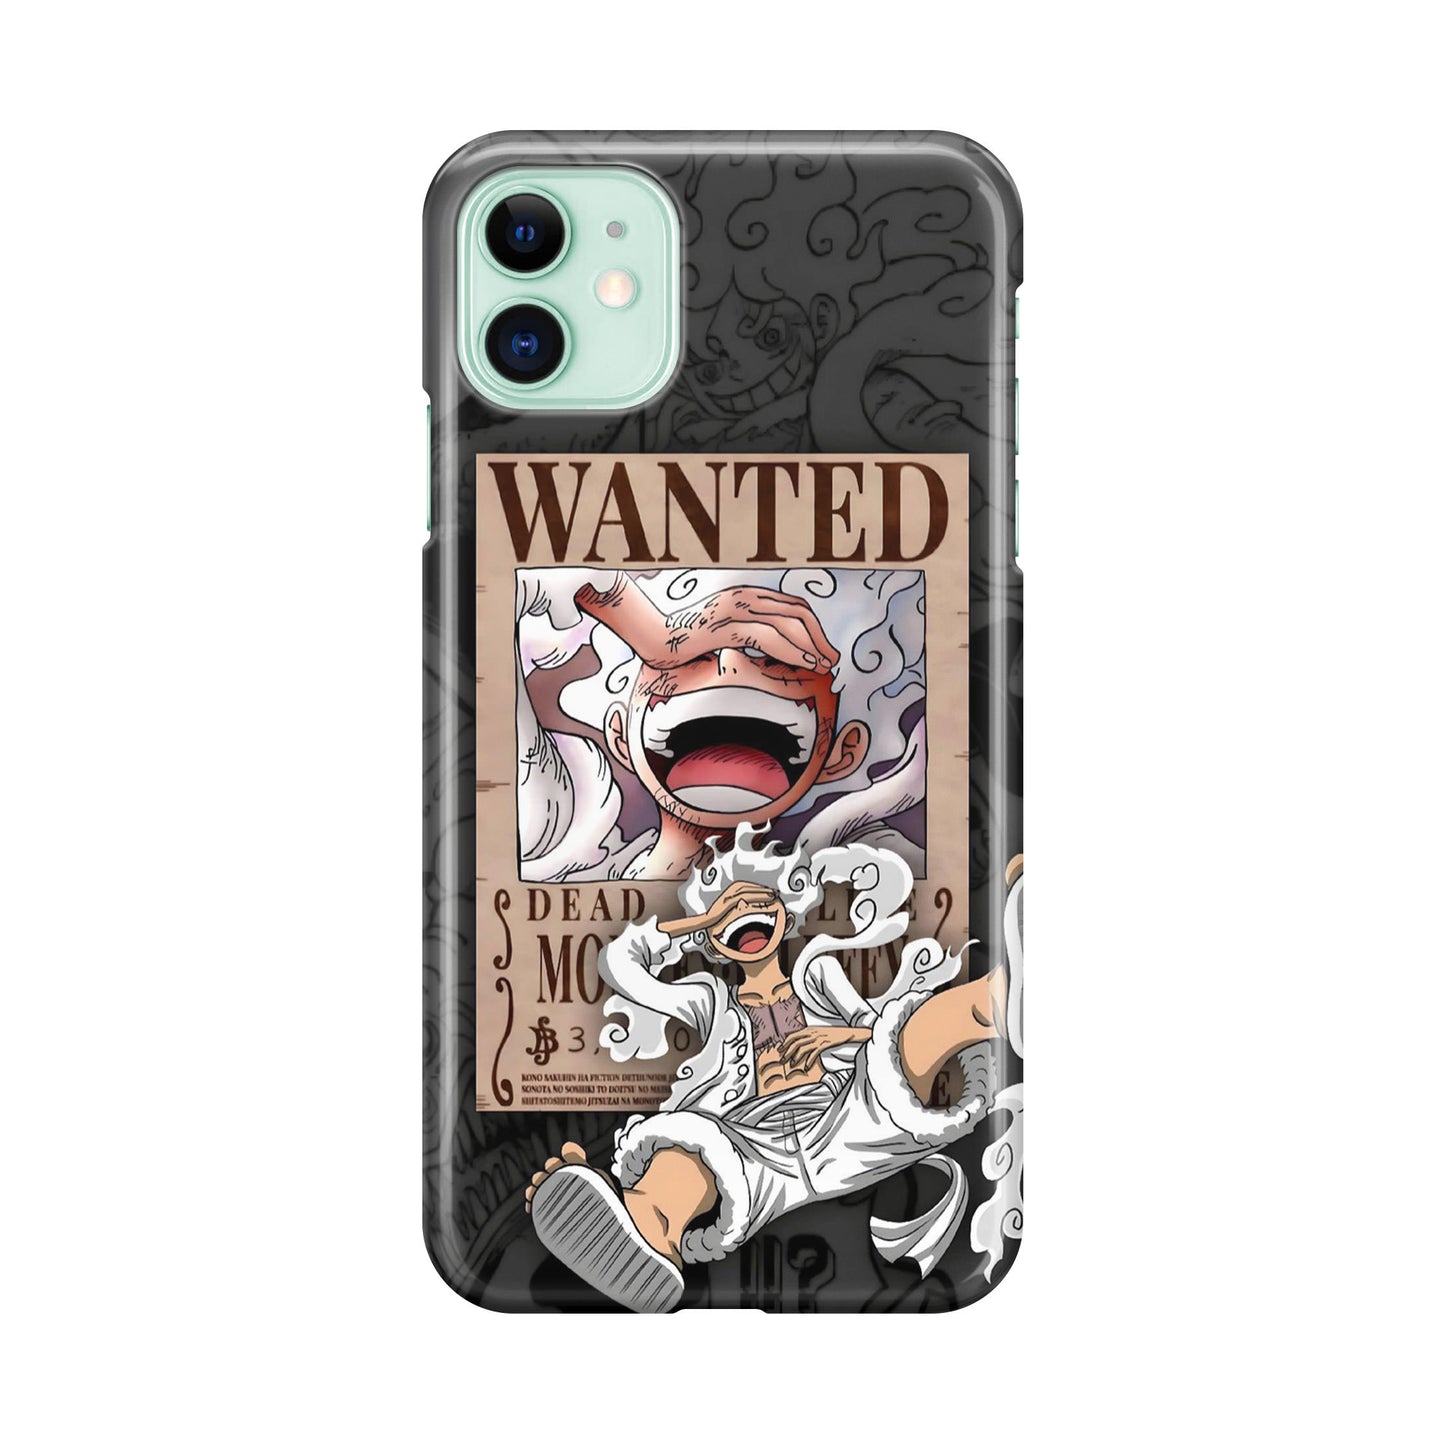 Gear 5 With Poster iPhone 12 Case